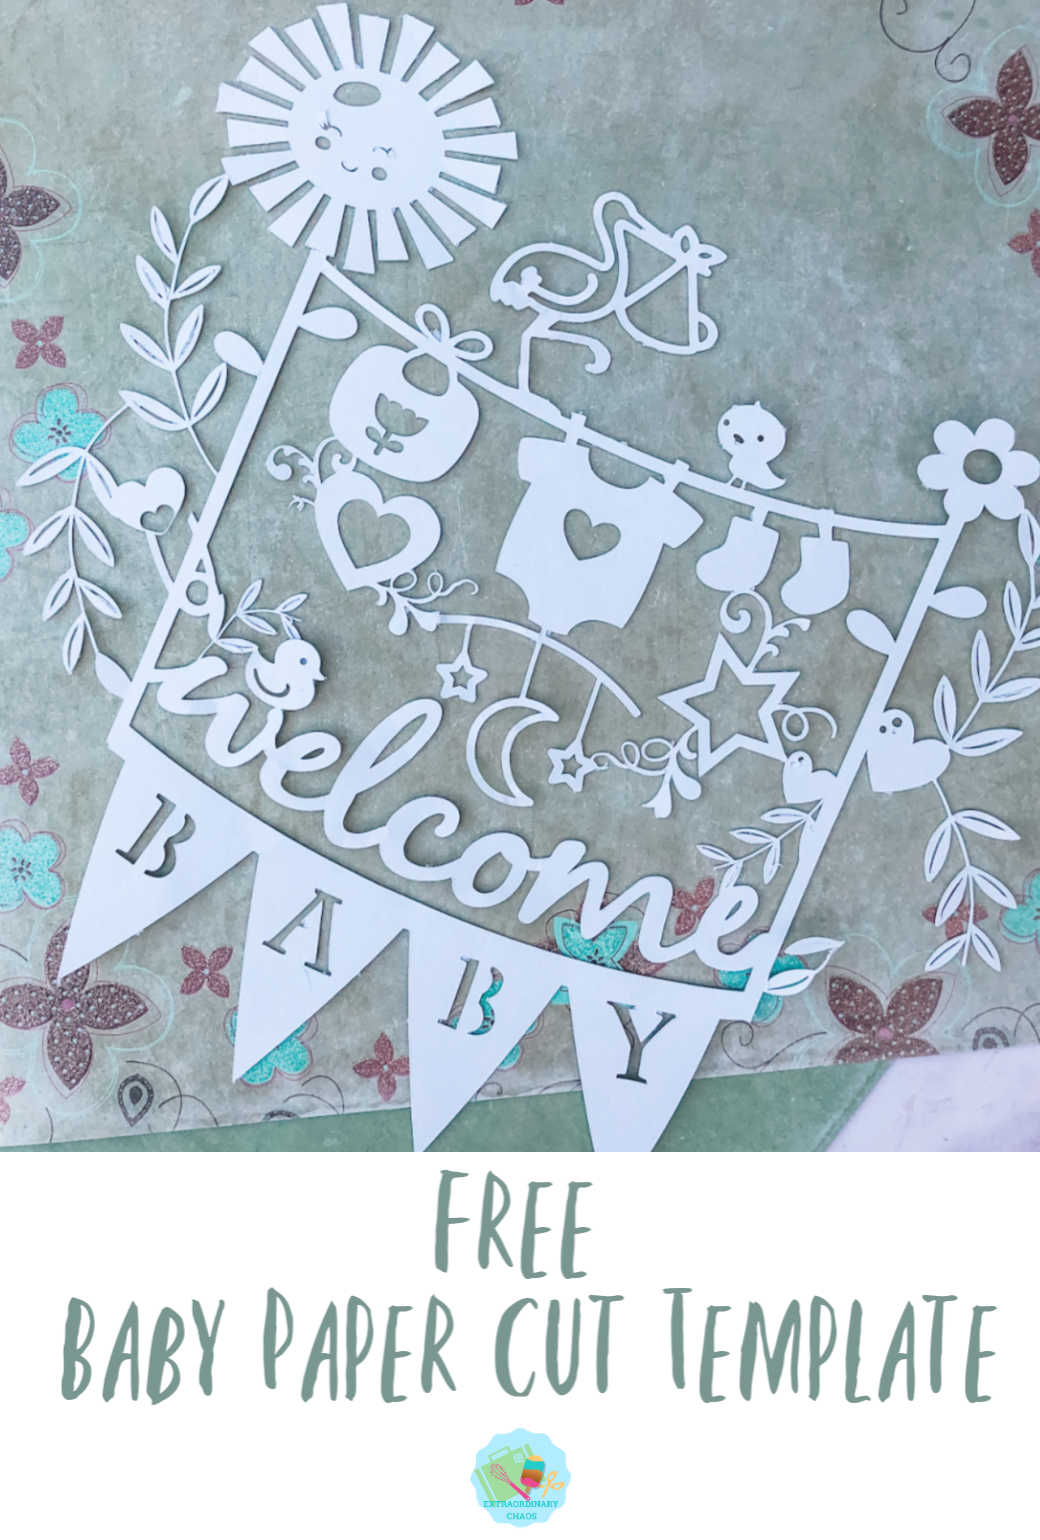 Free paper cut template for Cricut to make to sell or for gifts